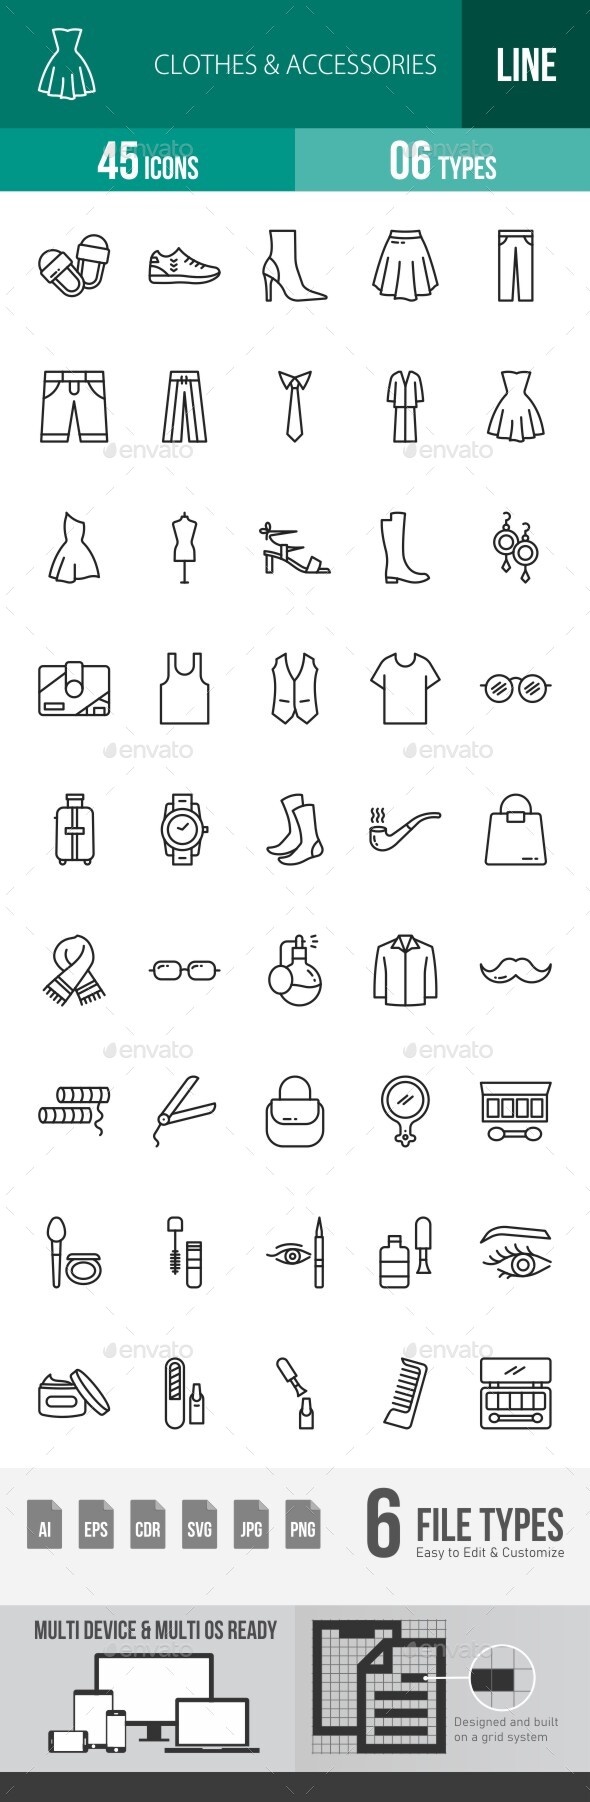 [DOWNLOAD]Clothes & Accessories Line Icons